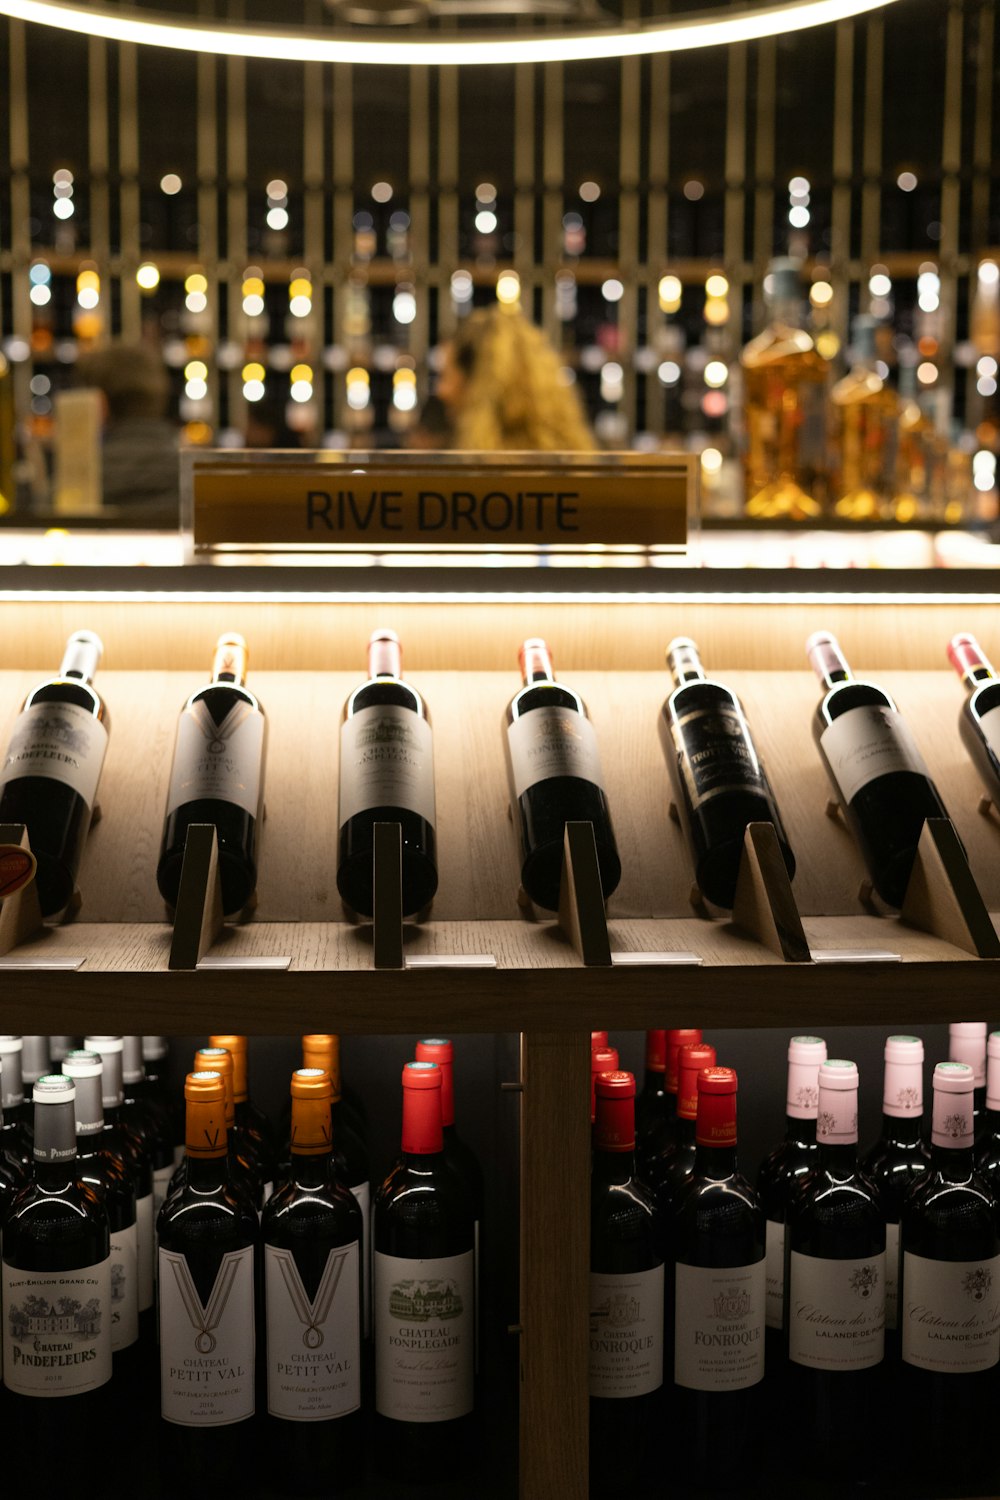 bottles of wine are lined up on a shelf